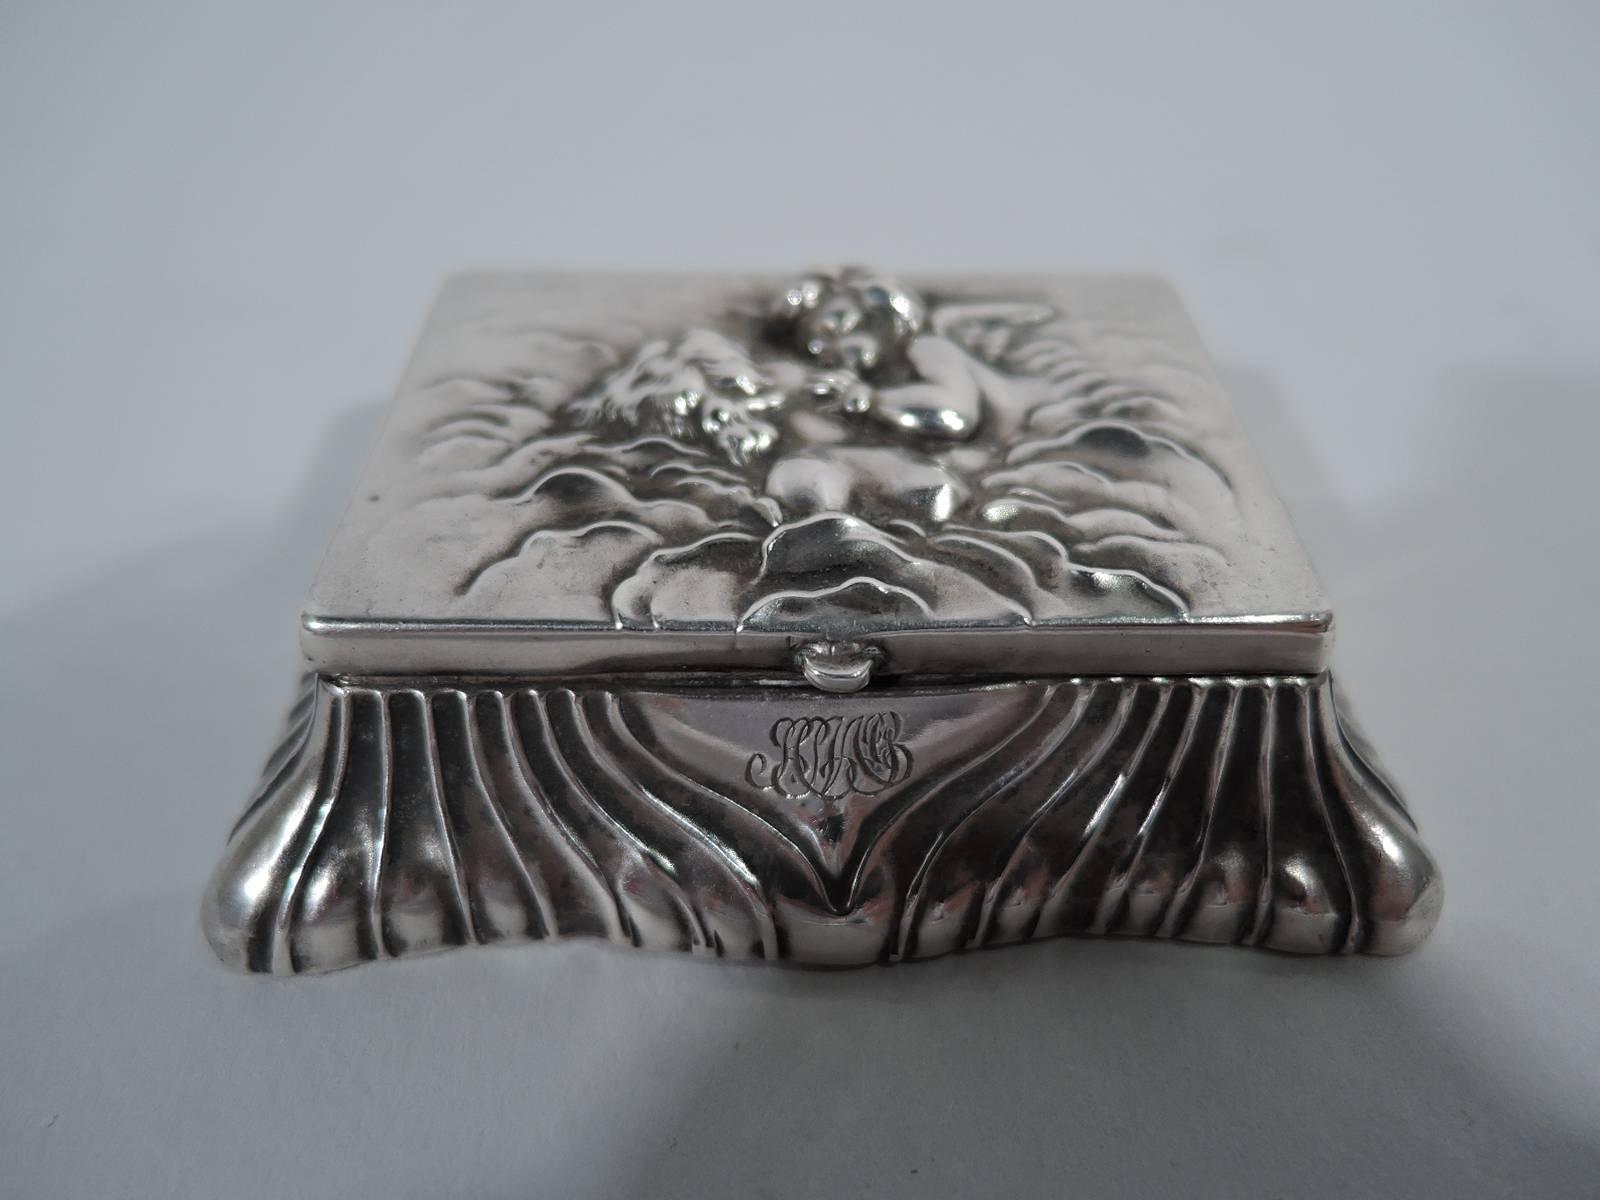 Art Nouveau sterling silver postage stamp box. Made by Unger Bros in Newark. Rectangular cover with mythological scene in low relief: Cupid kisses Venus on wavy cloud ground. Cover hinged to undulating and fluted spread base. Interlaced script